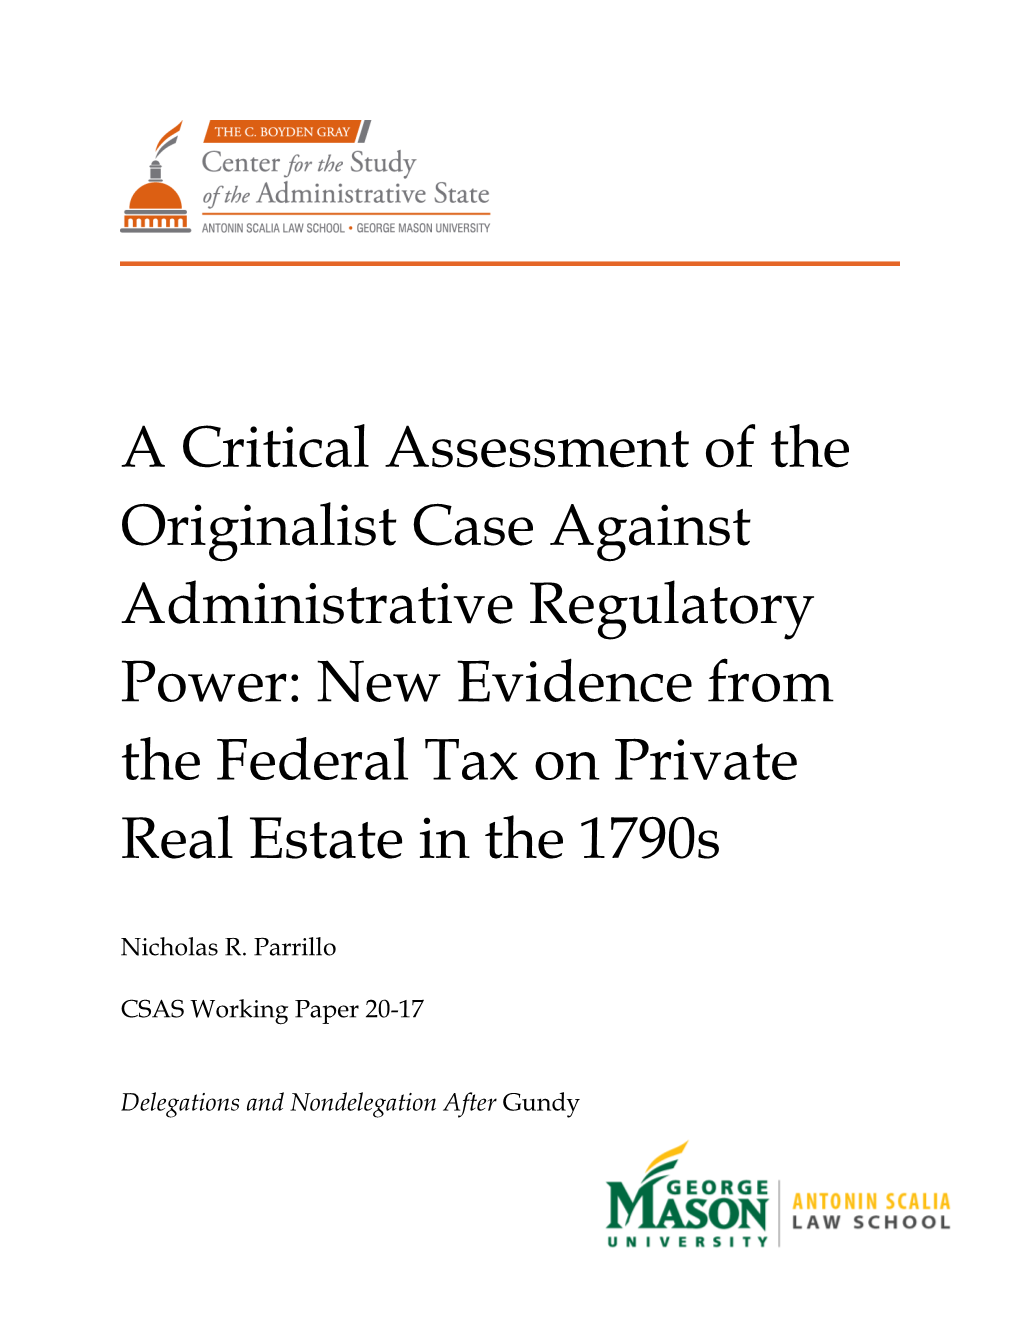 A Critical Assessment of the Originalist Case Against Administrative Regulatory Power: New Evidence from the Federal Tax on Private Real Estate in the 1790S